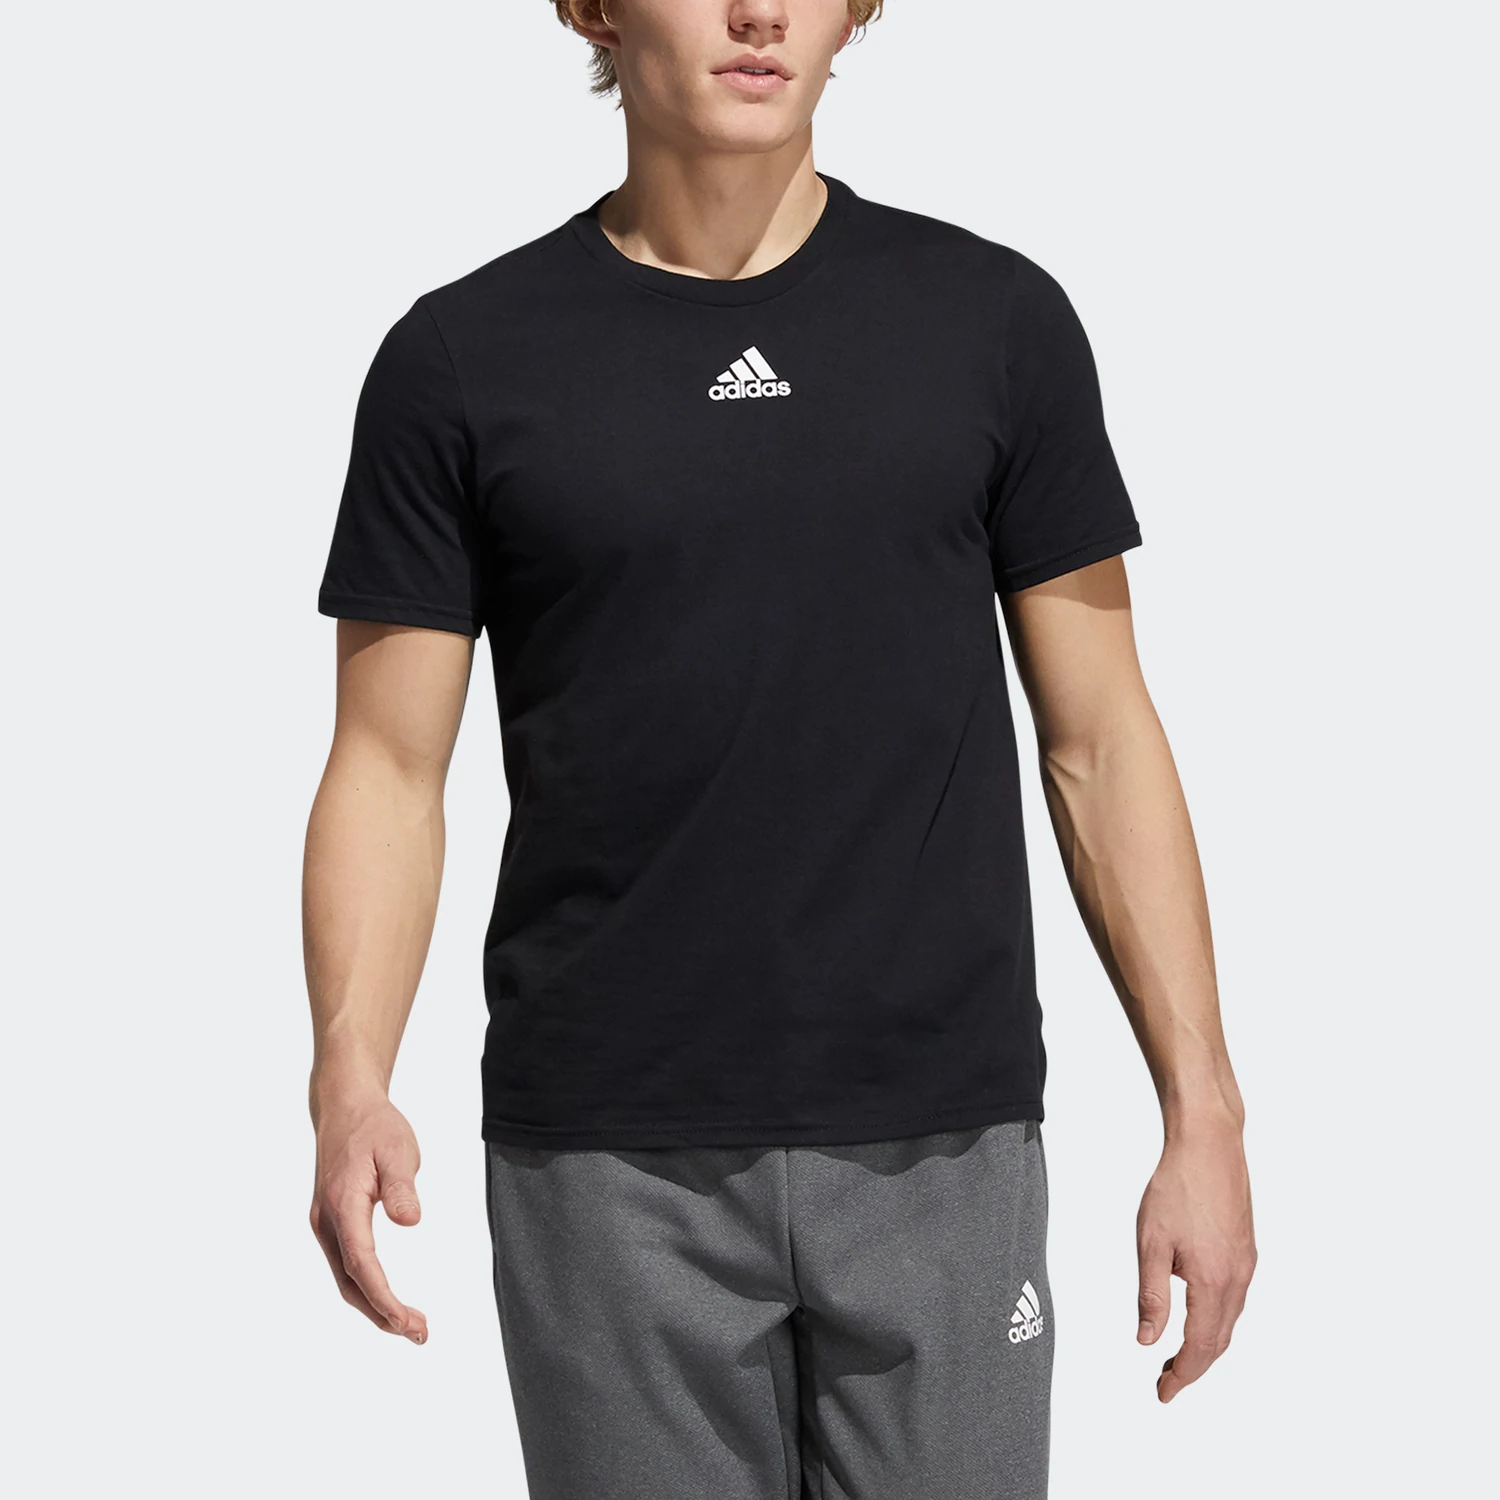 adidas Men's Amplifier Tee $9.86,  Women's Essentials 3-Stripes Cropped Hoodie $14.60, More + Free Shipping